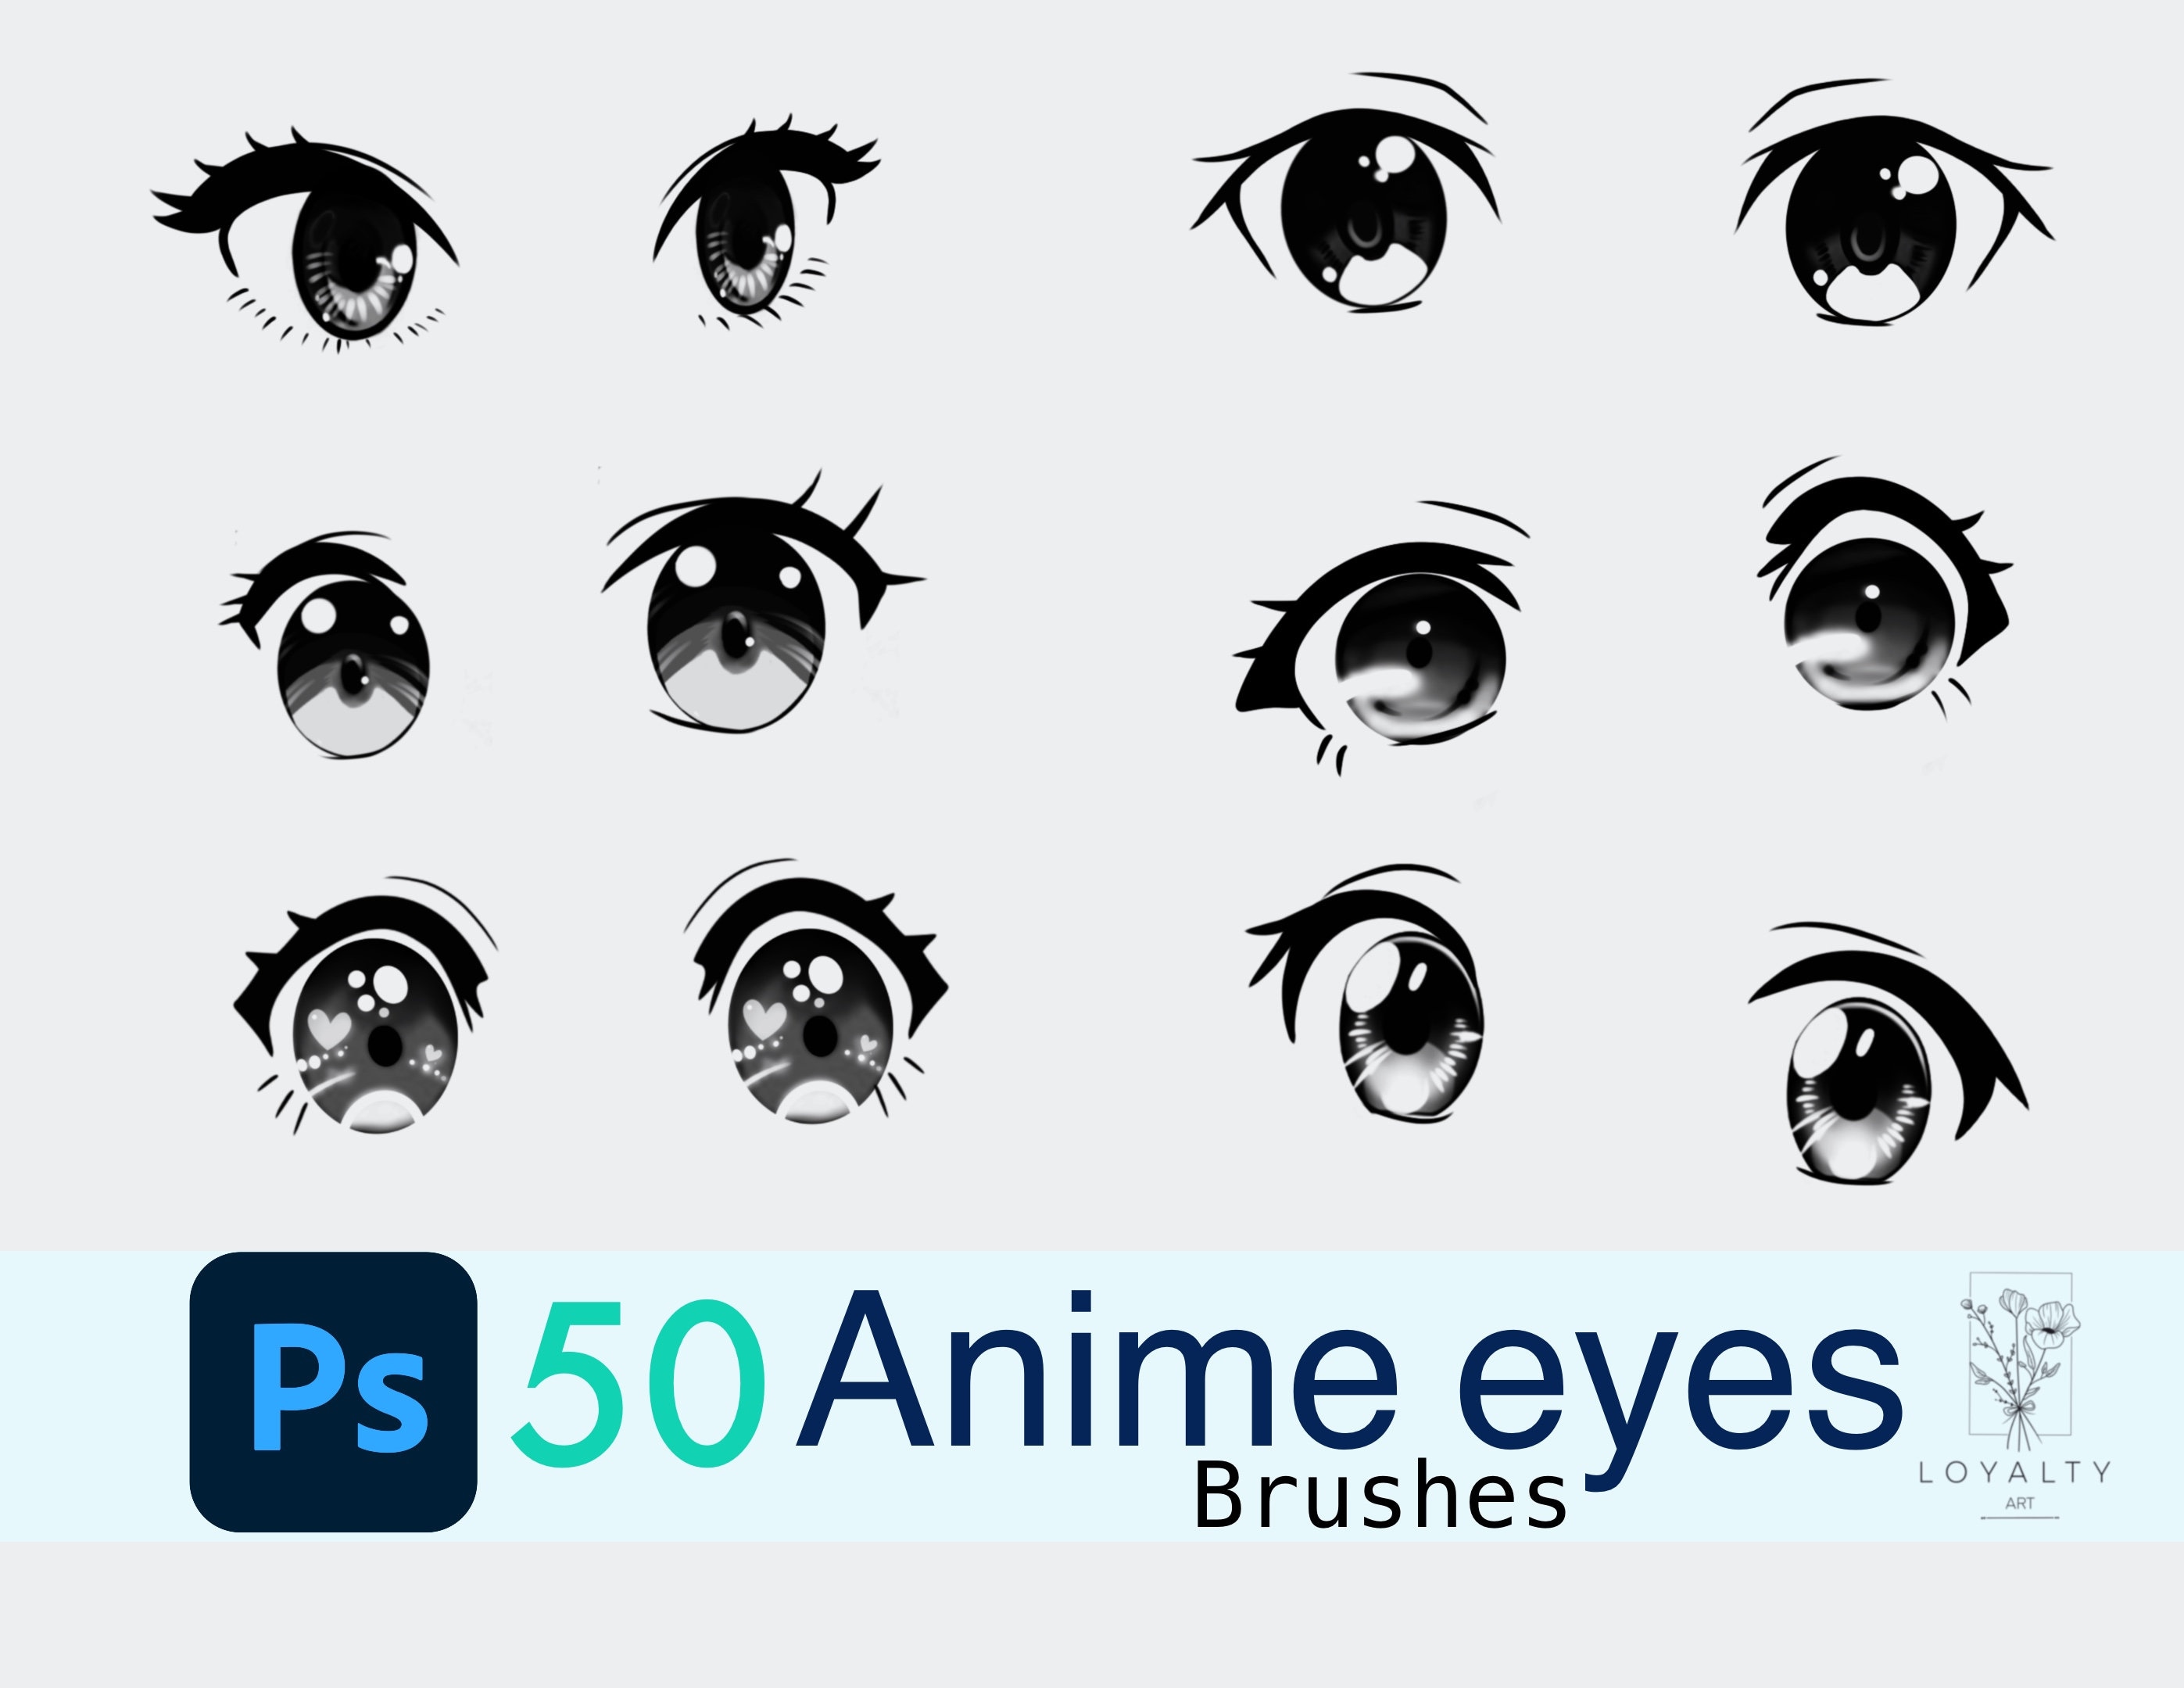 HOW TO COLOR ANIME EYES WITH CHEAP ART SUPPLIES 